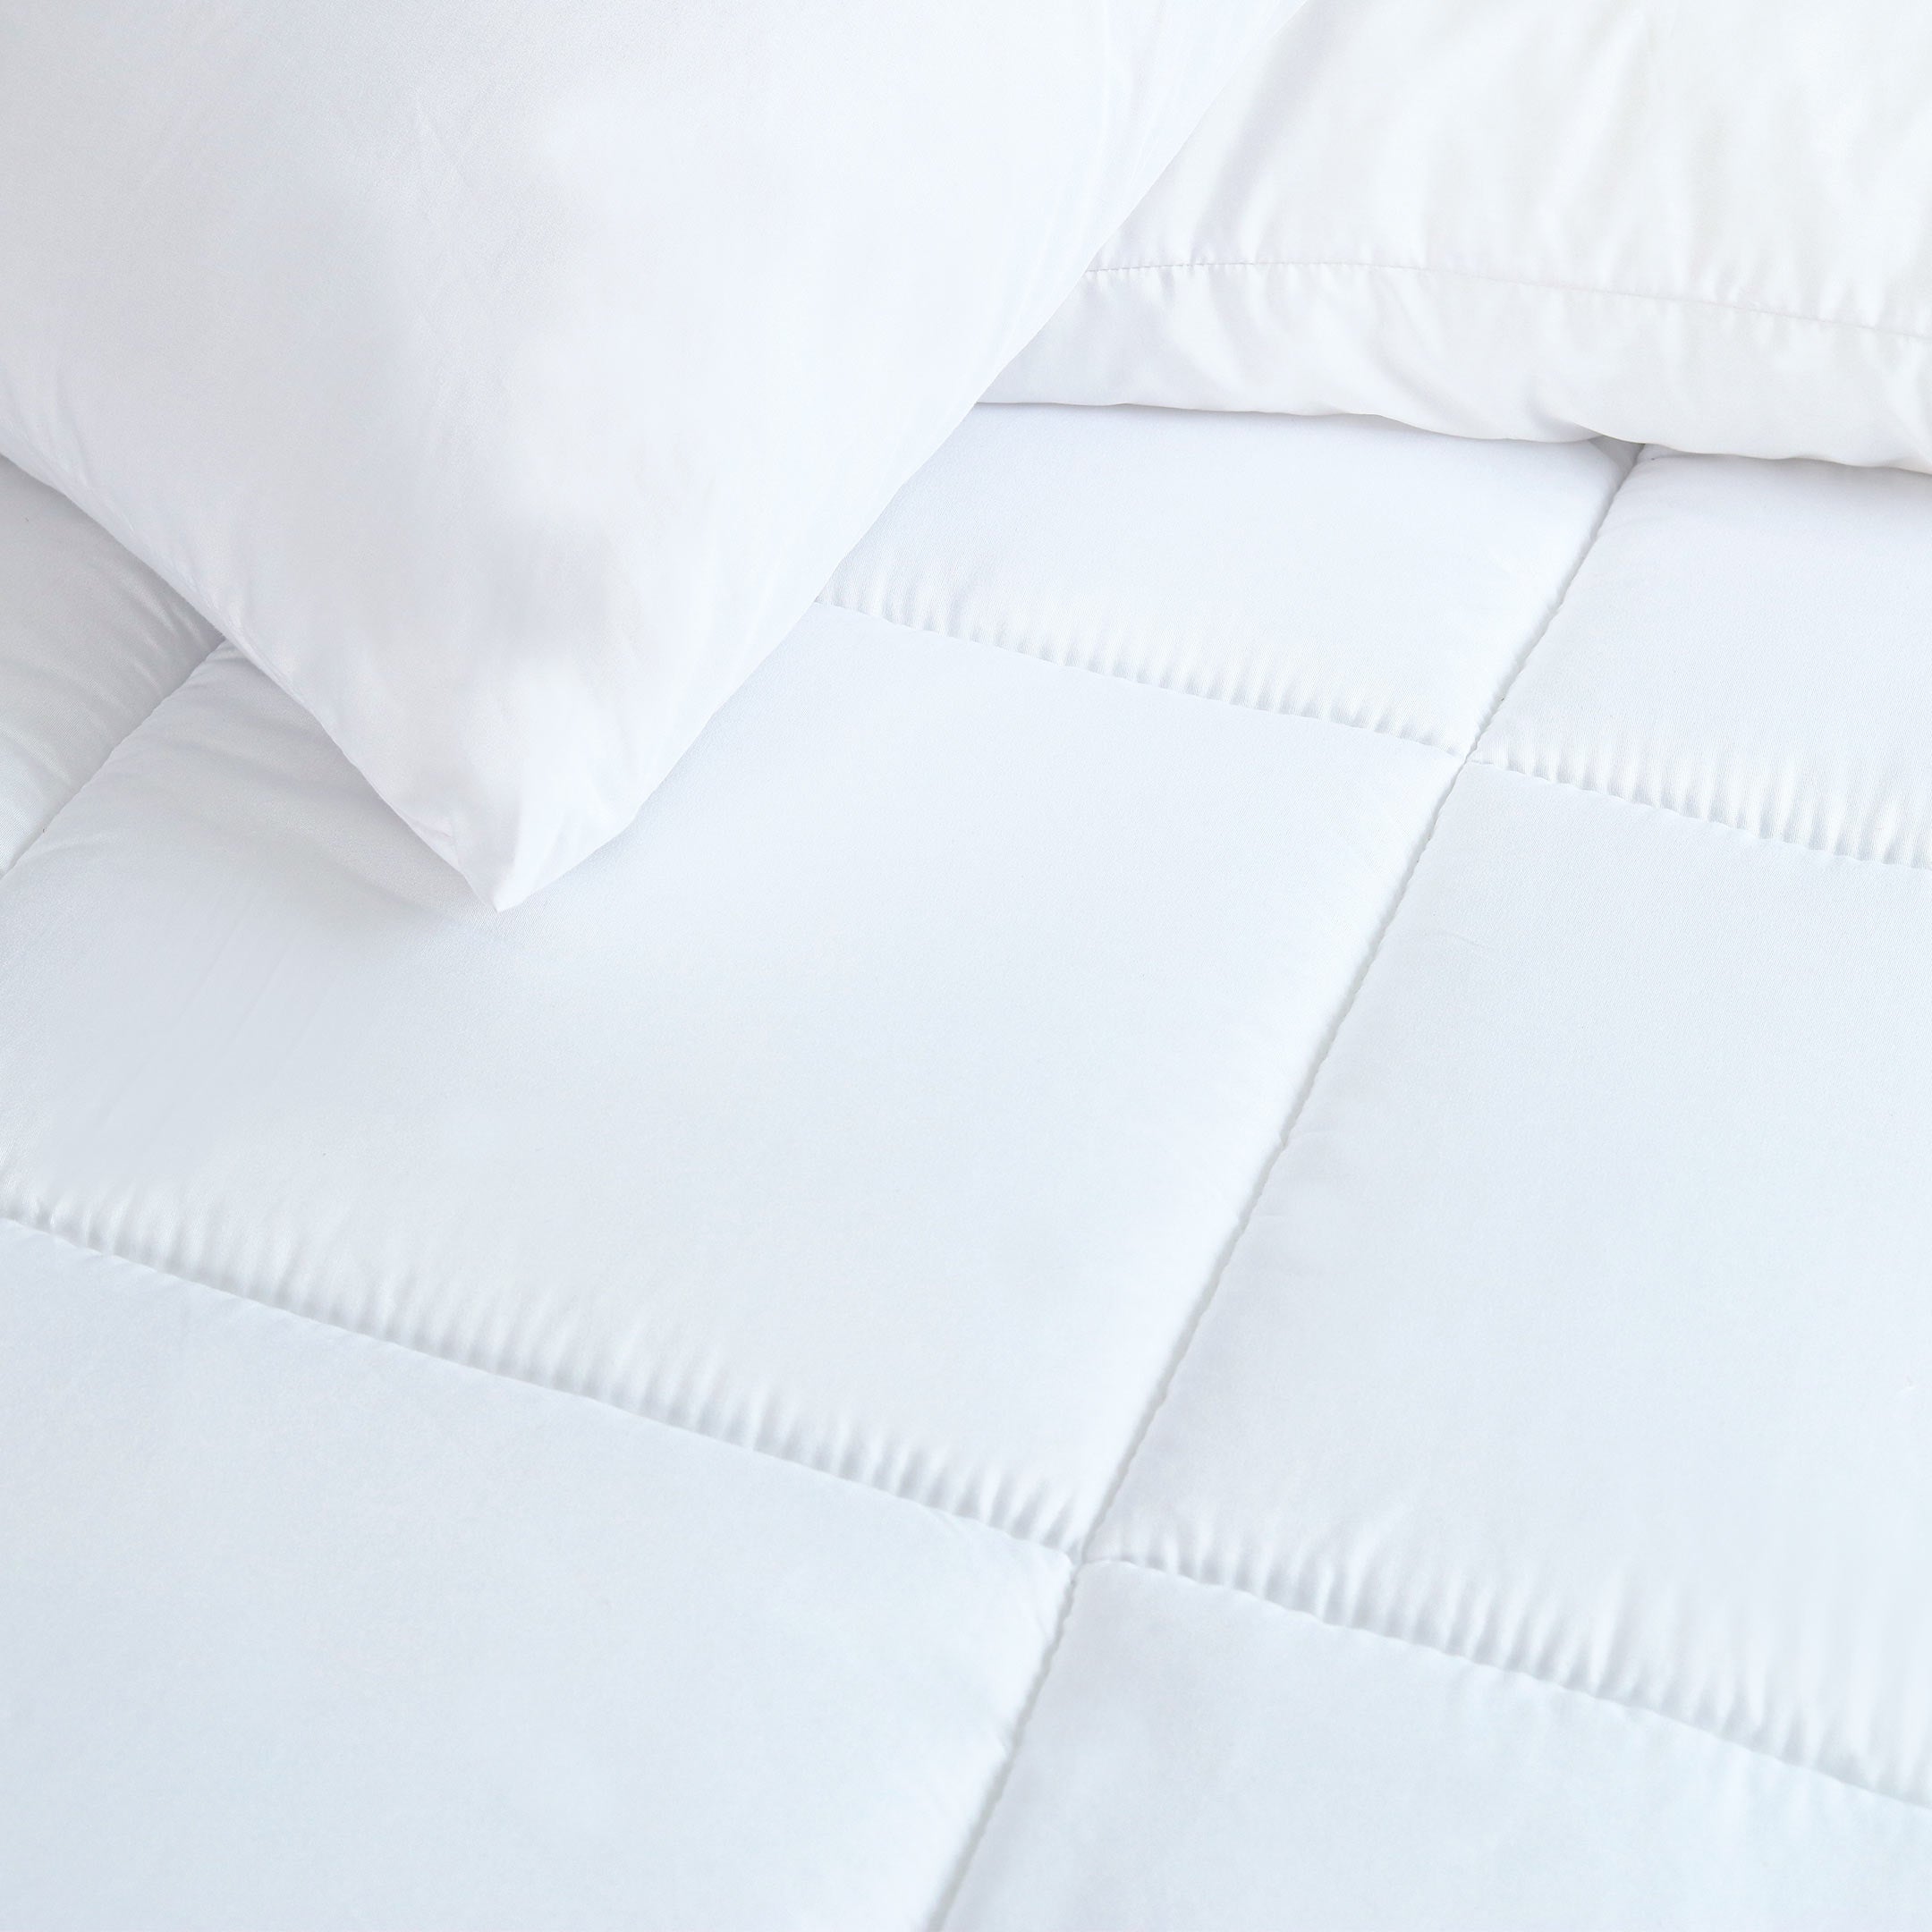 Square Quilted Mattress Topper White